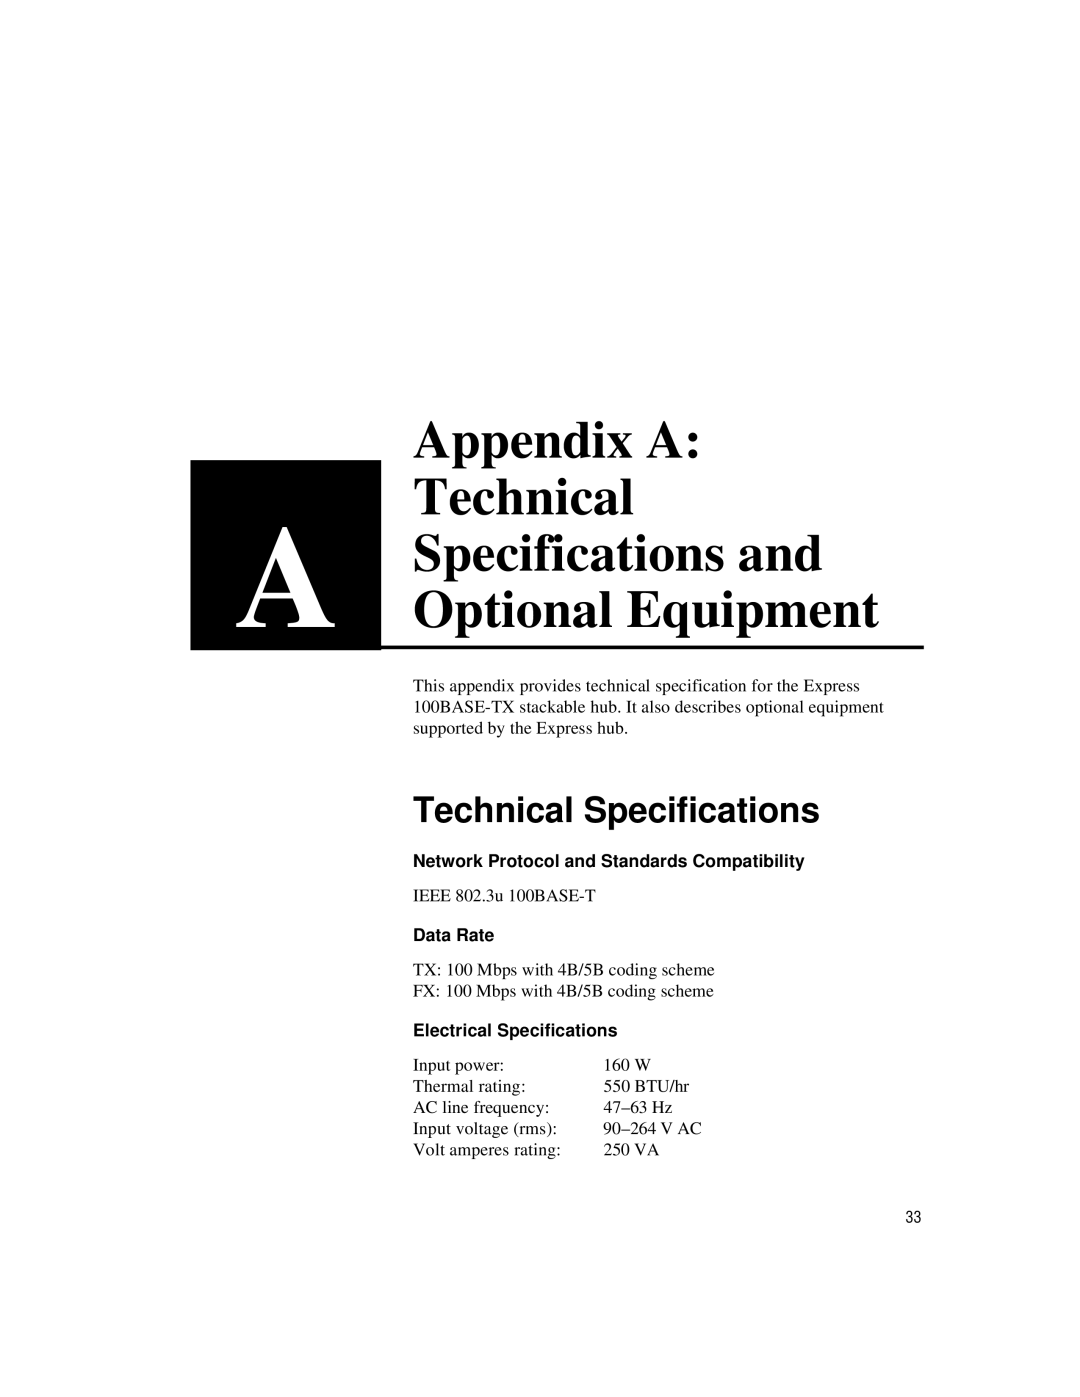 Intel 100BASE-TX manual Appendix A Technical Specifications and, Optional Equipment 